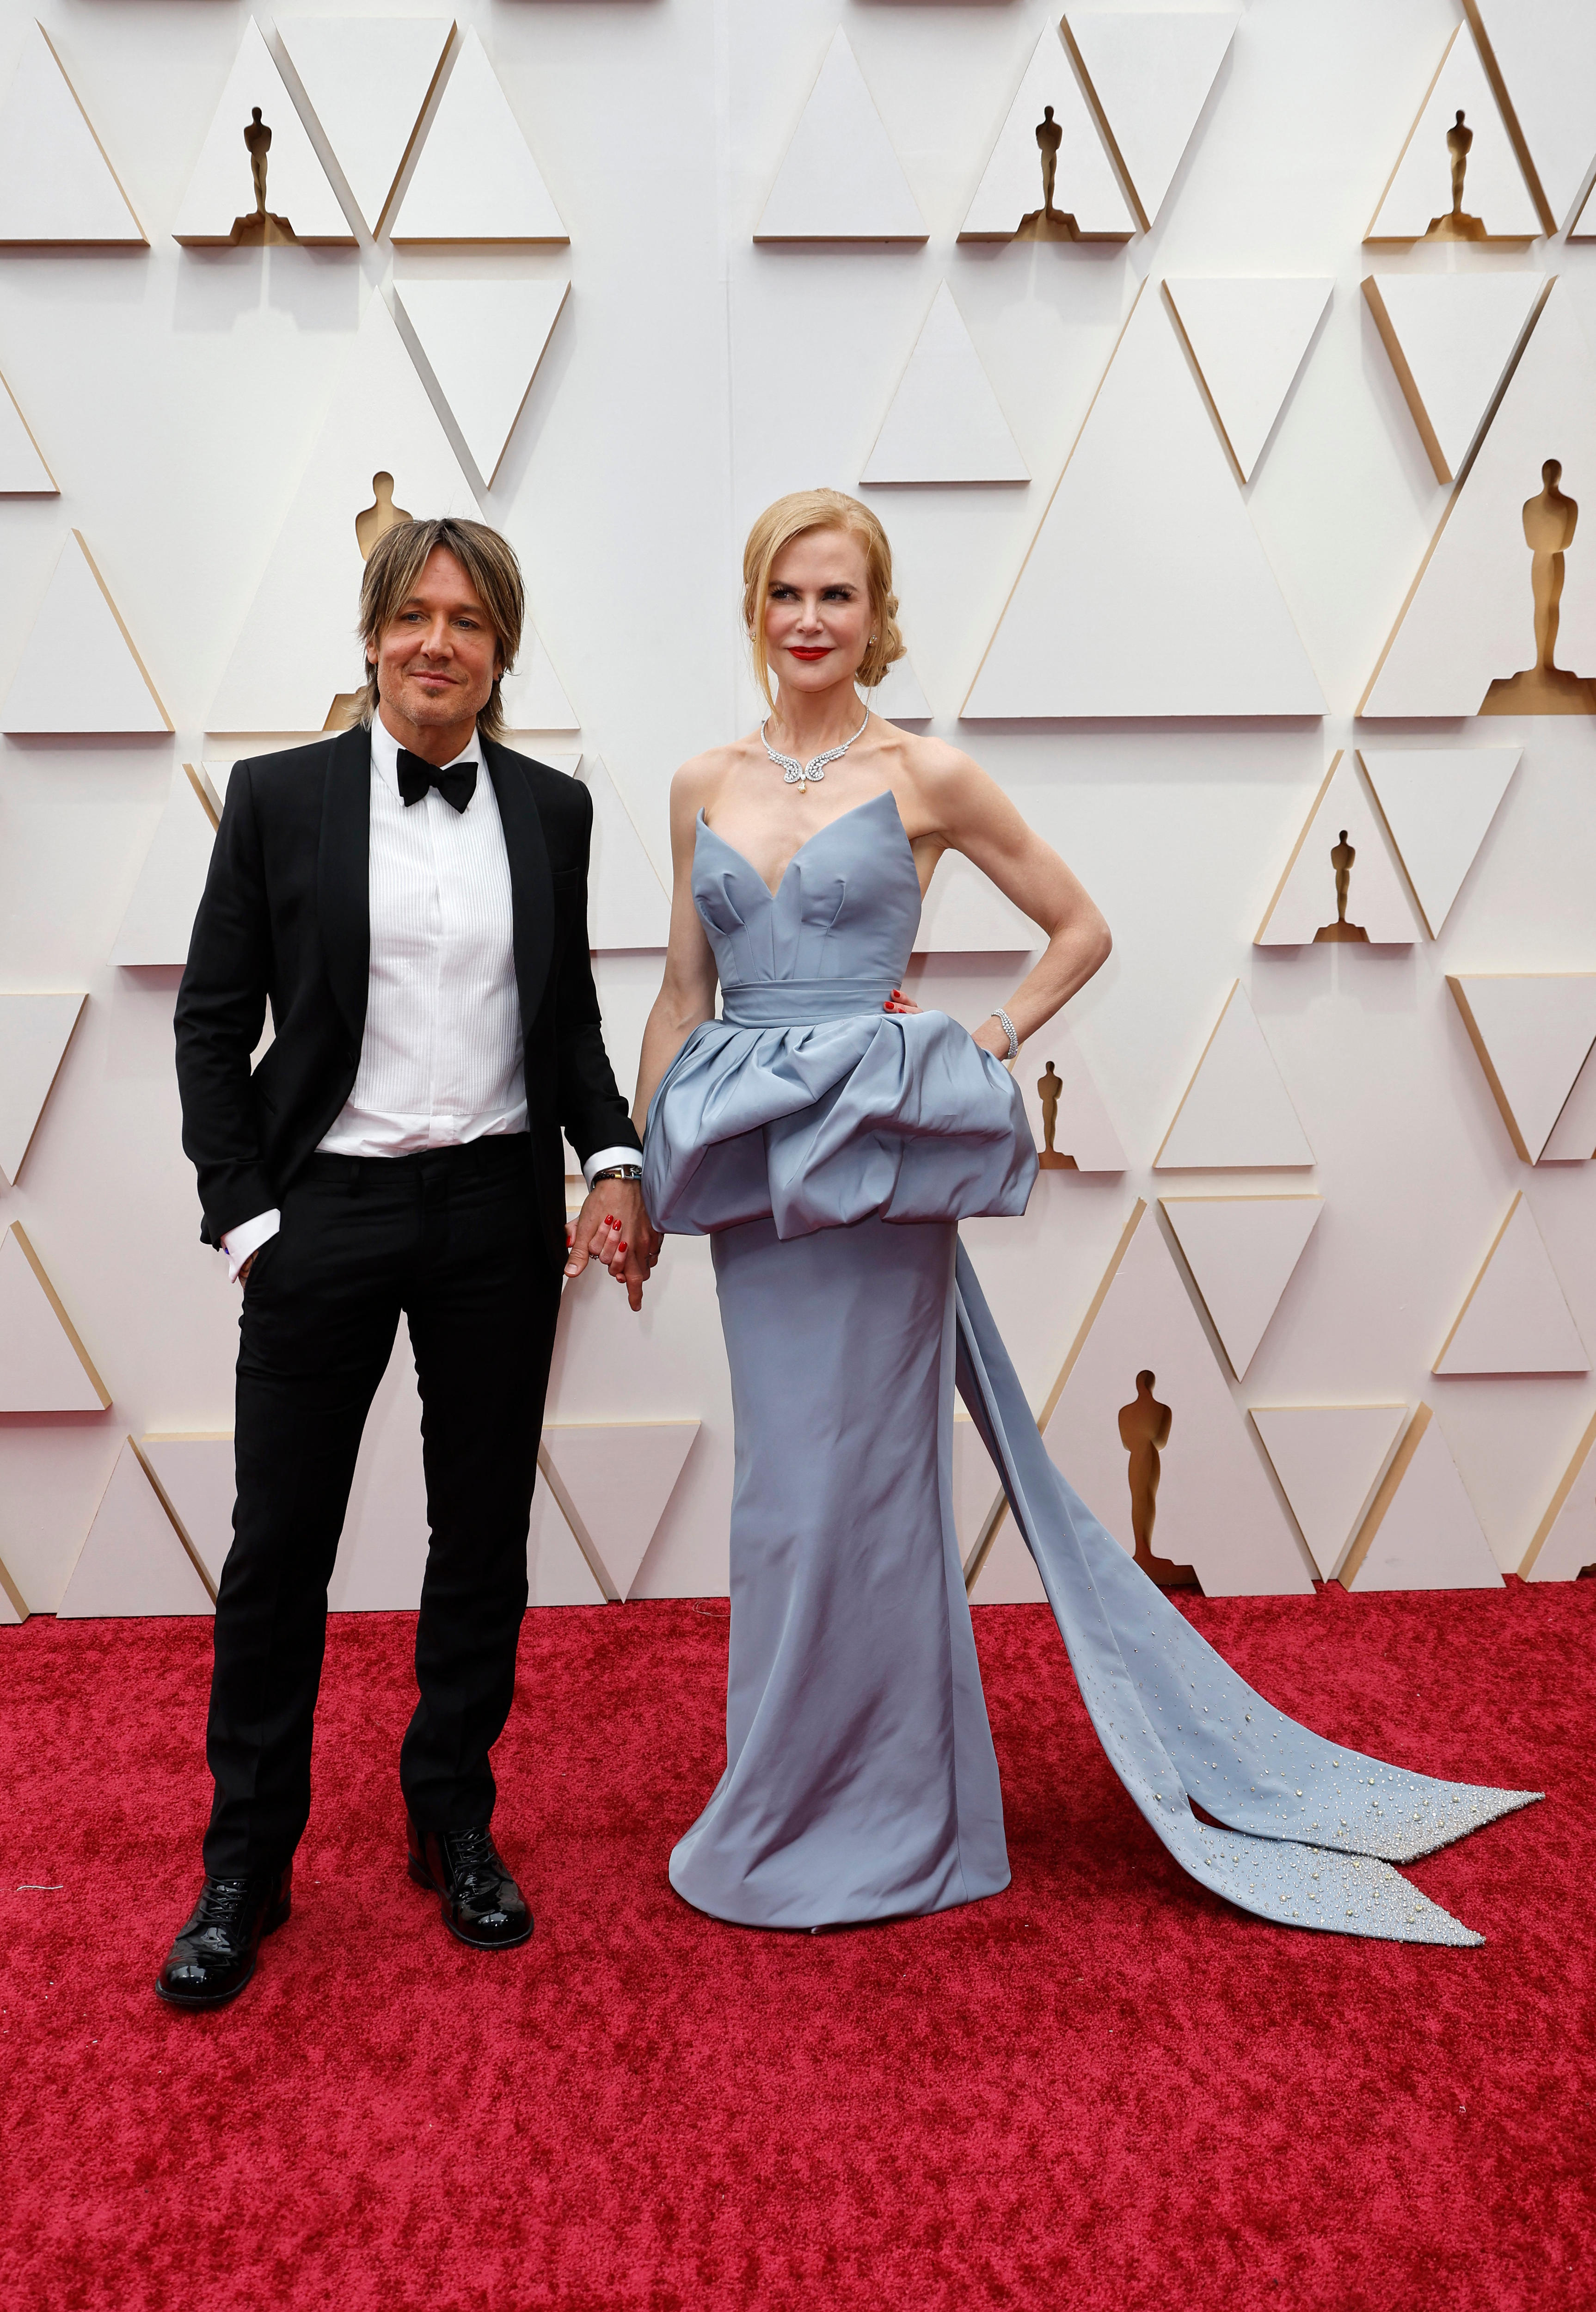 keith urban andn icole kidman stand holding hands on the oscars red carpet, nicole wearing a grey-blue down with a bell waist